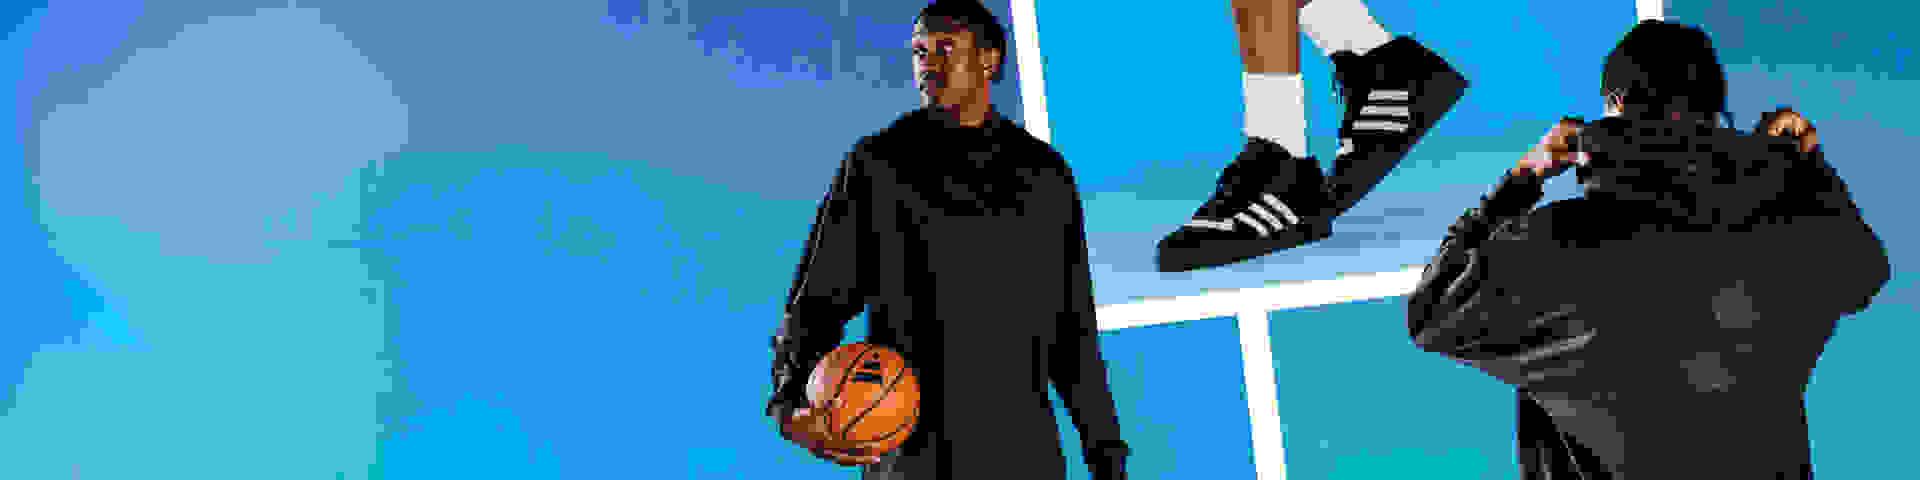 Collage of male basketball athlete wearing black top and shorts, white socks and three-stripes shoes, and holding basketball, against blue background